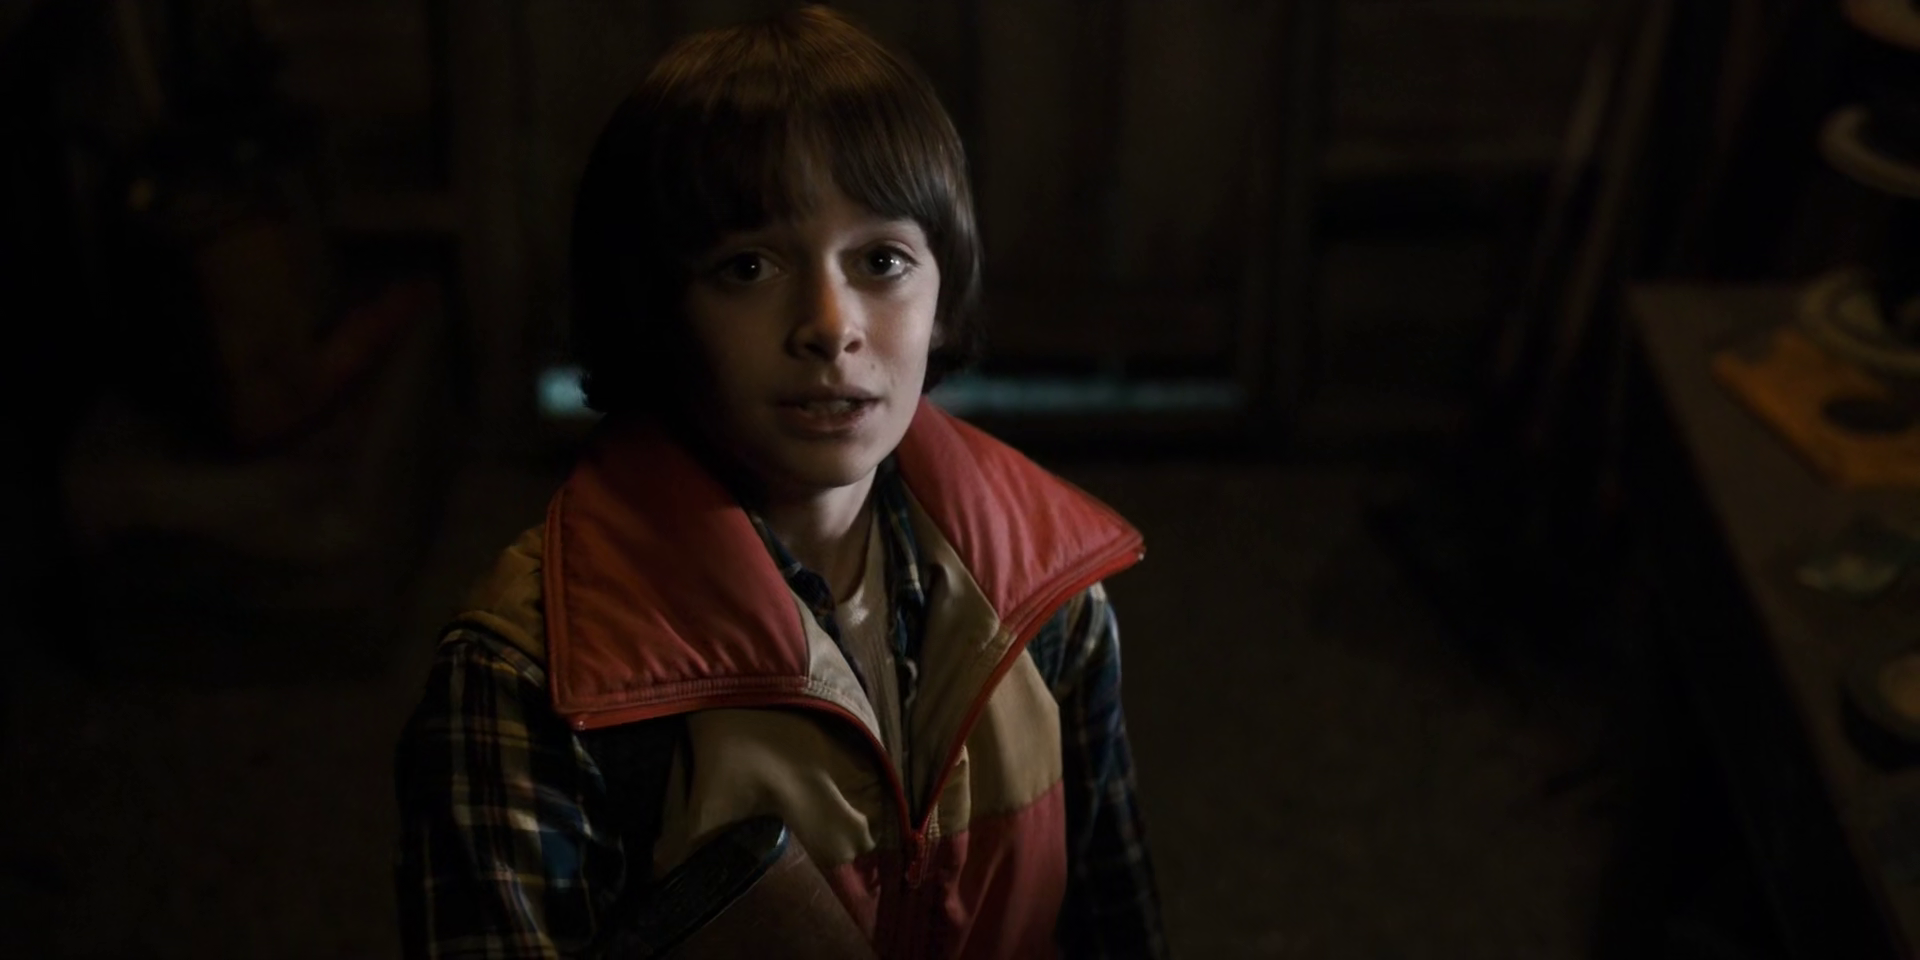 Stranger Things: Noah Schnapp Confirms Key Will Byers Theory - IGN